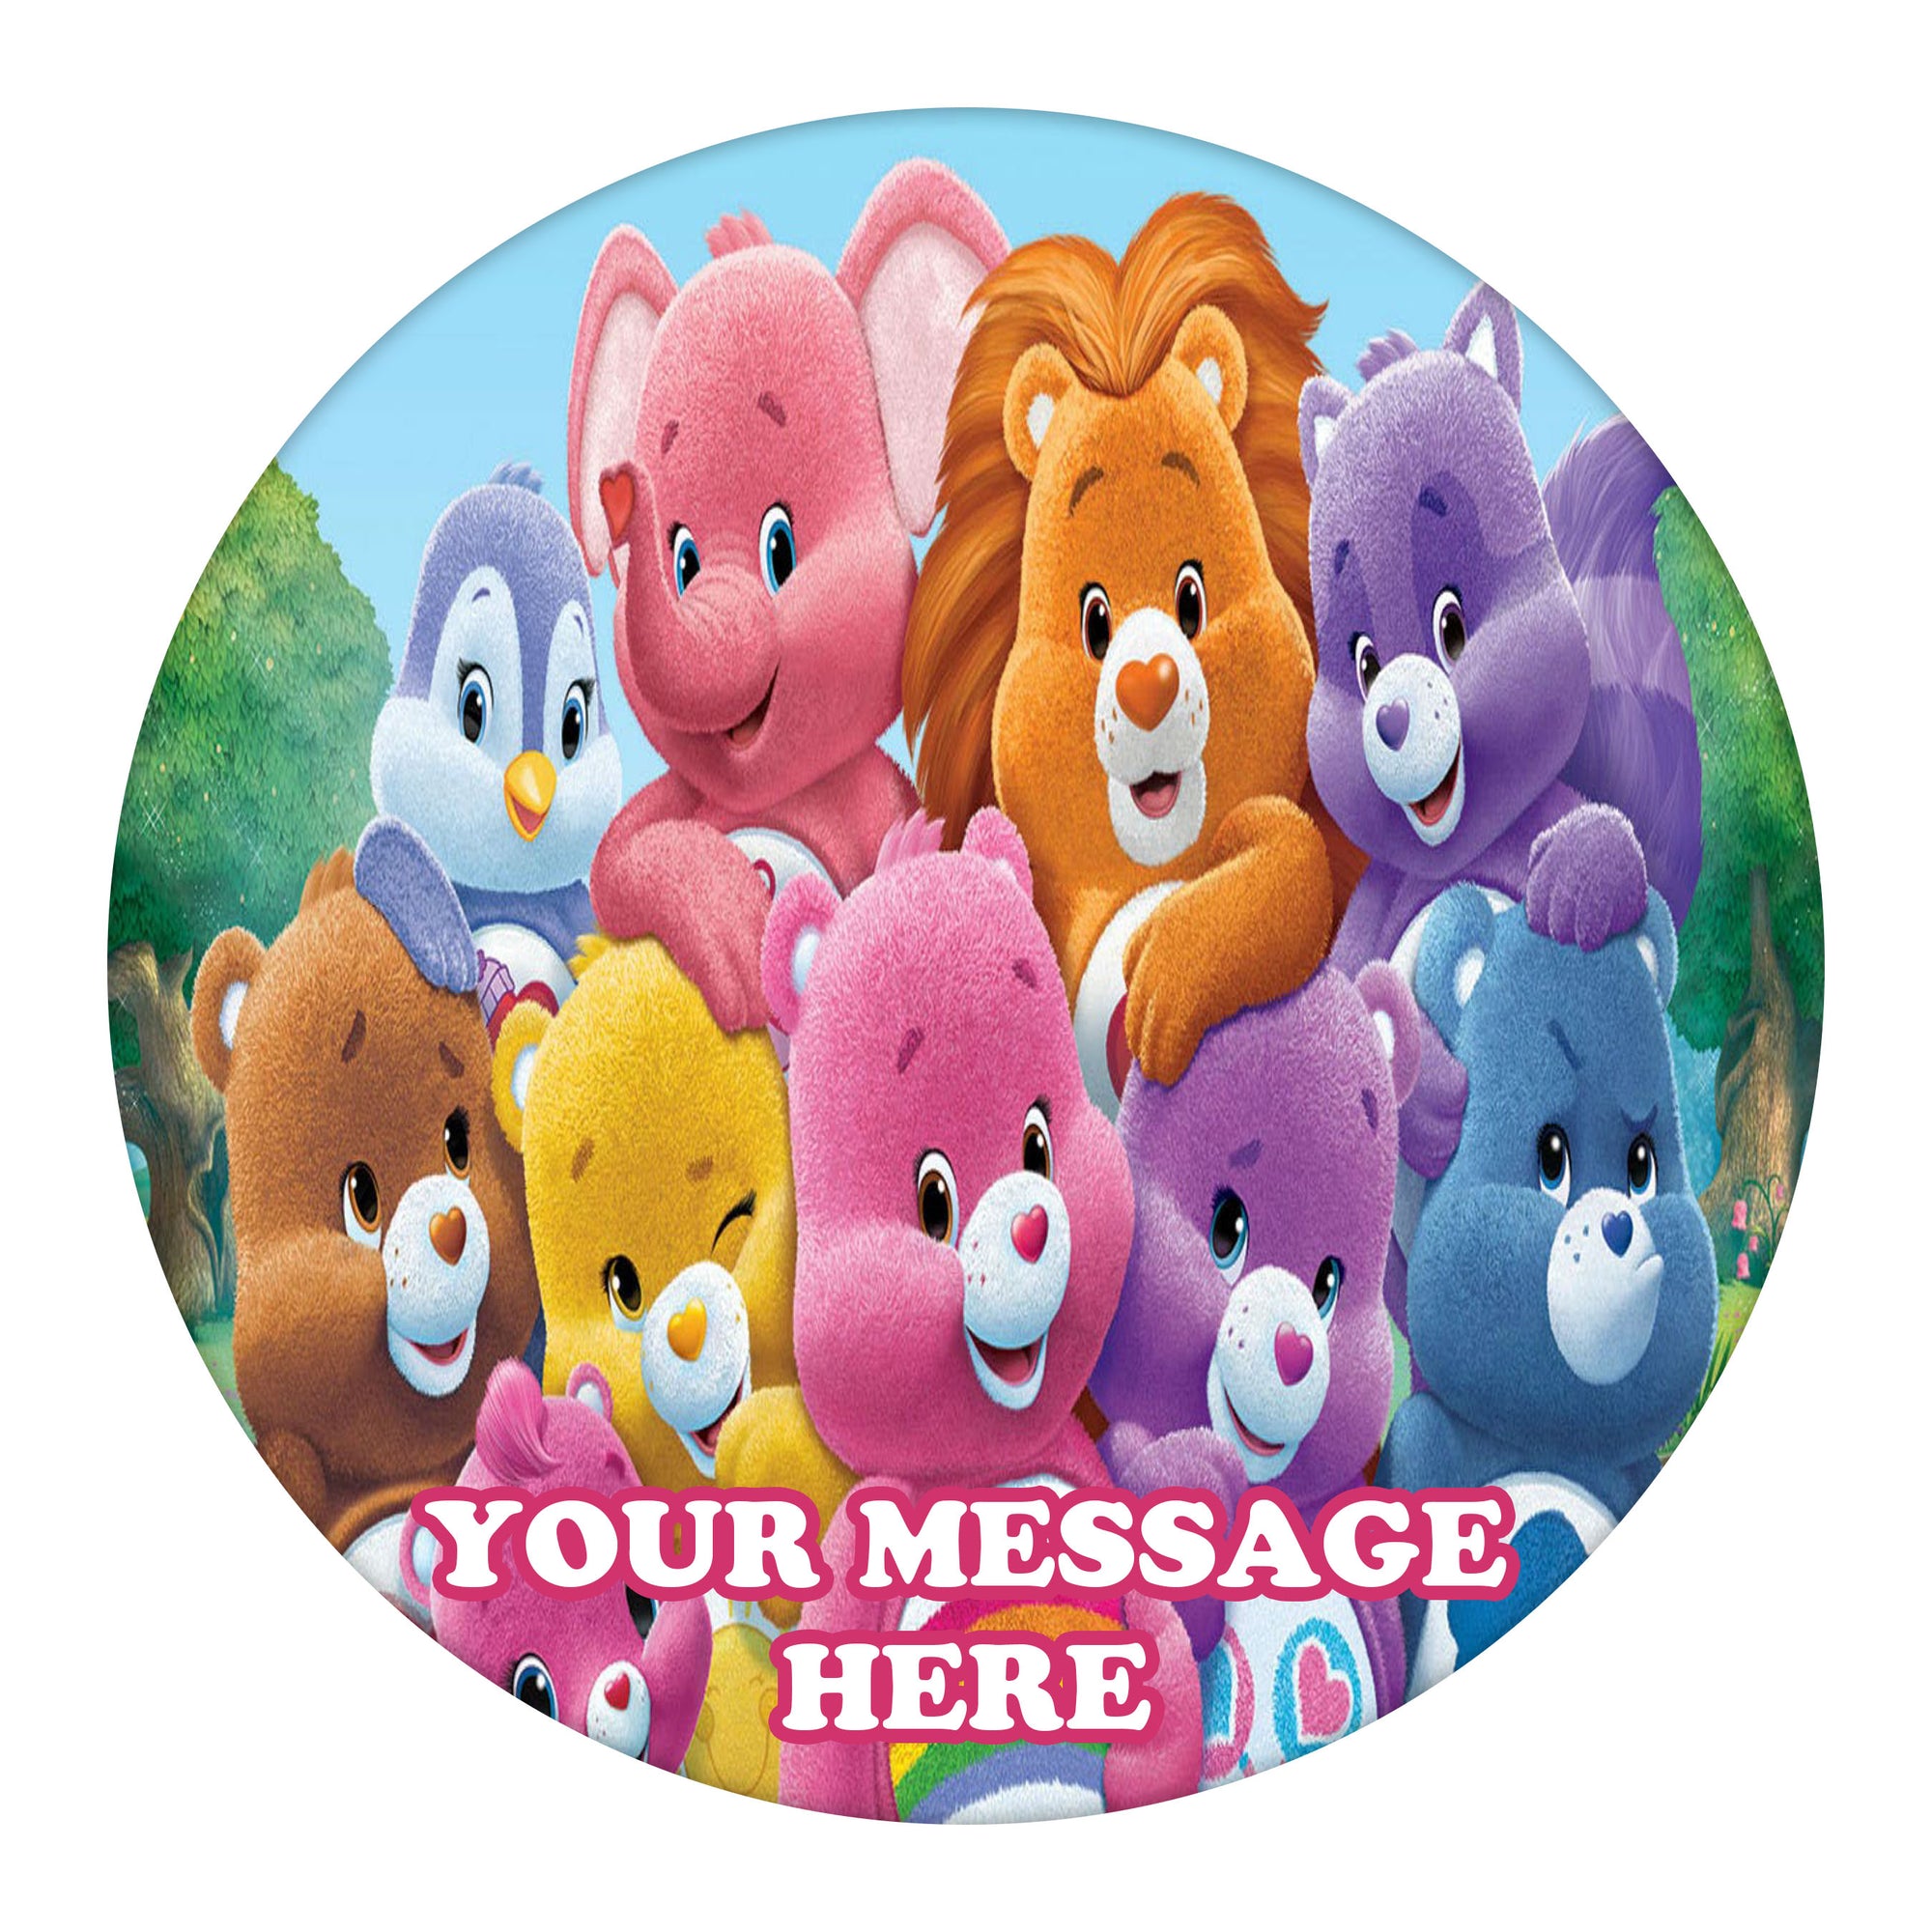 Care Bears Edible Image Cake Topper Personalized Birthday Sheet Custom -  PartyCreationz